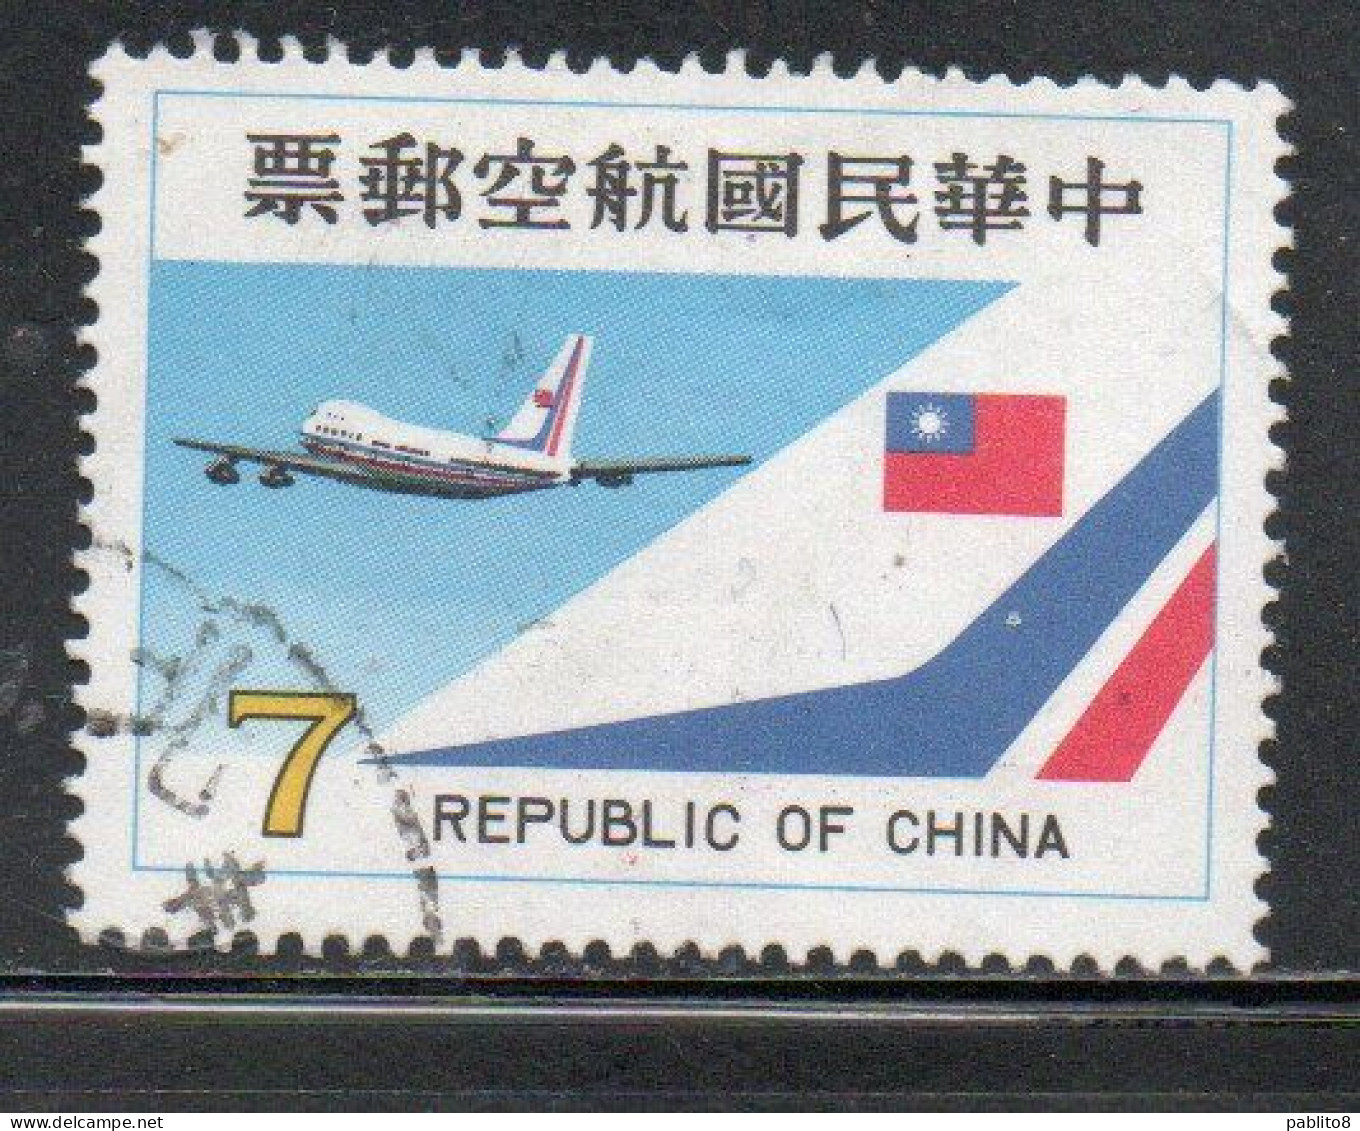 CHINA REPUBLIC CINA TAIWAN FORMOSA 1980 AIR POST MAIL AIRMAIL CHINA AIRLINES JET 7$ USED USATO OBLITERE' - Posta Aerea